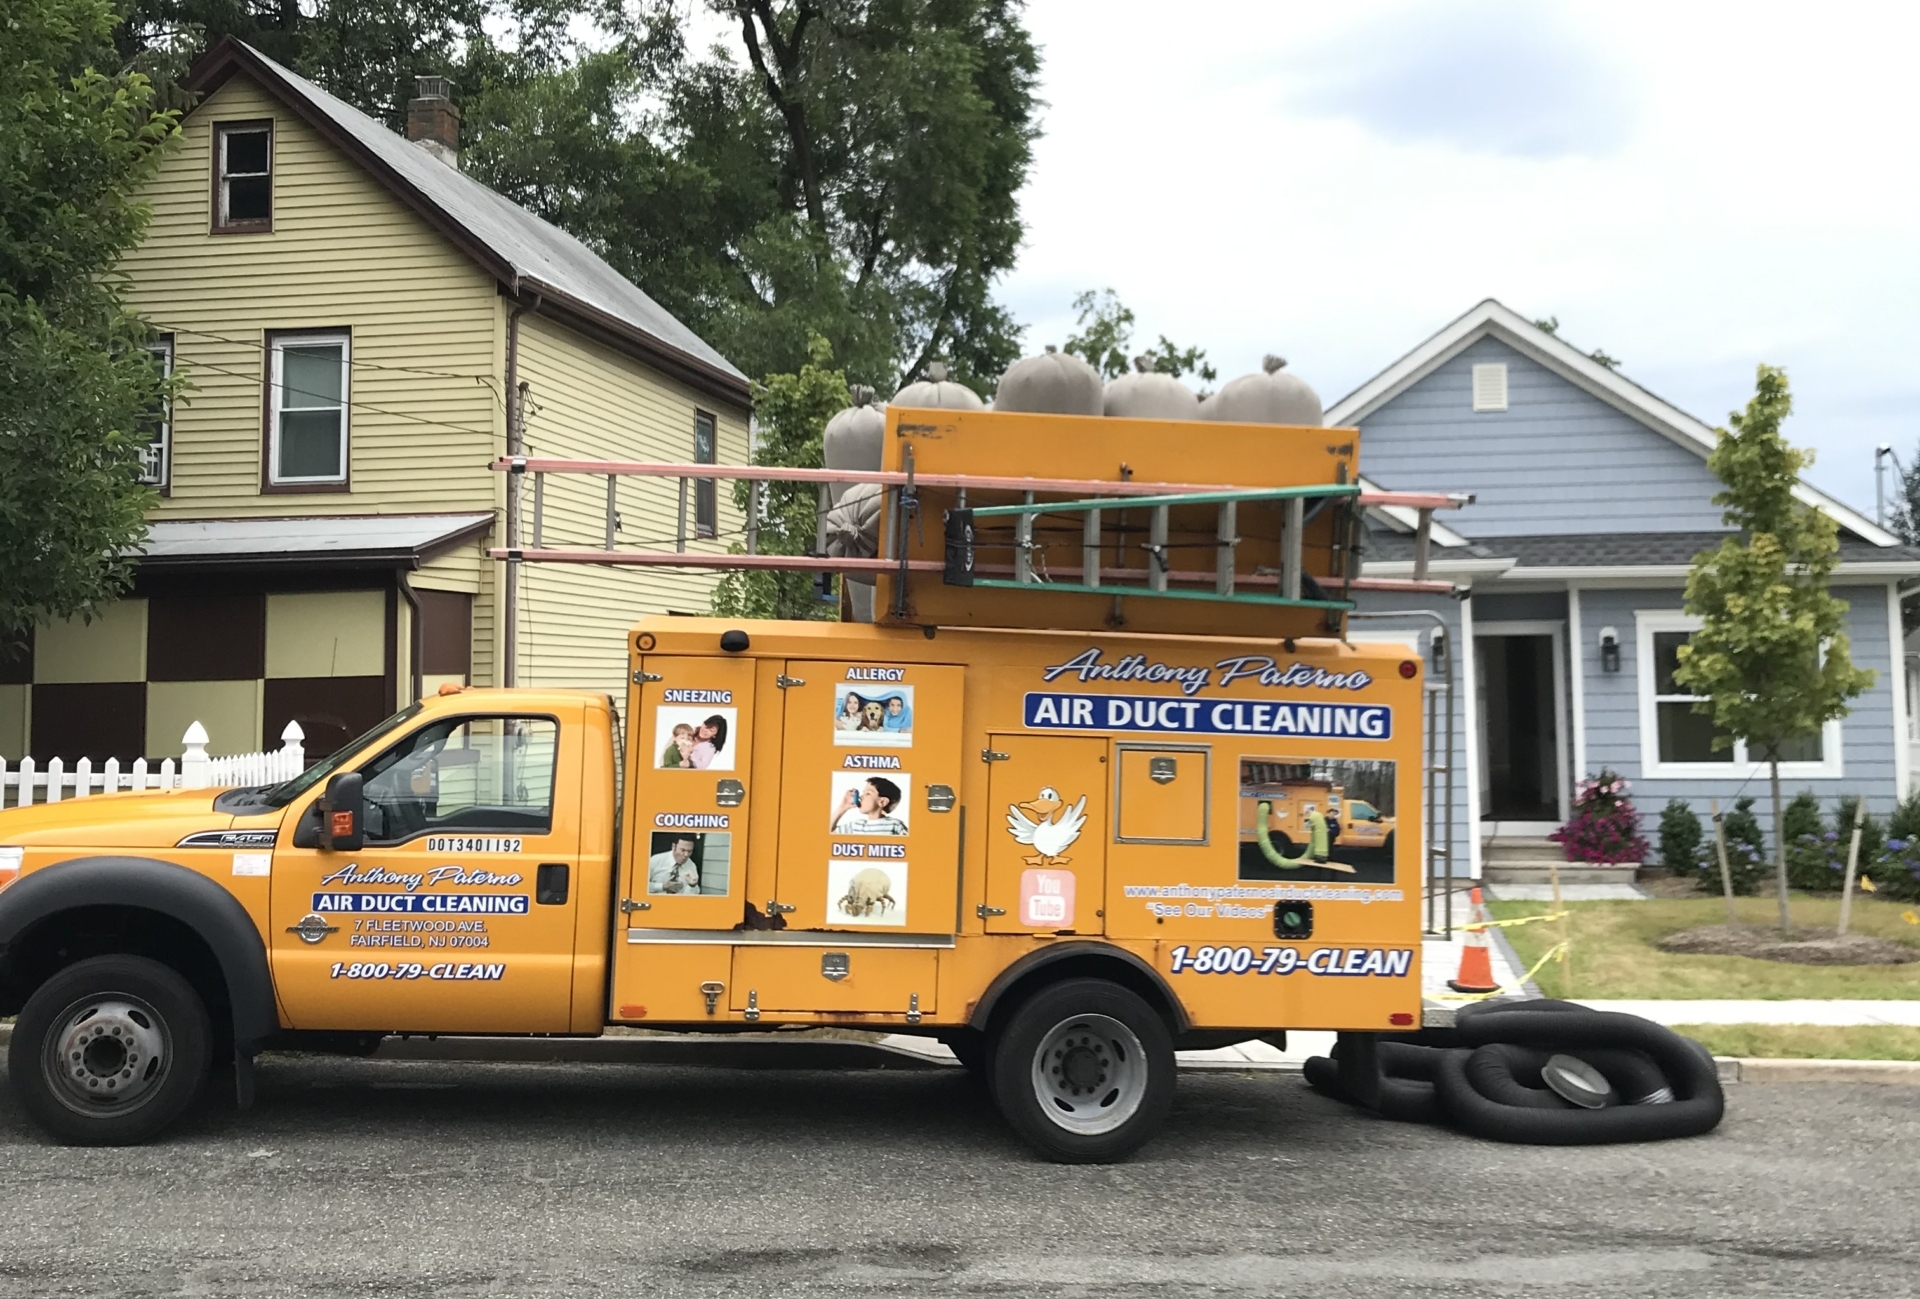 Air Duct Cleaning on Ackerman Ave, Milltown, NJ